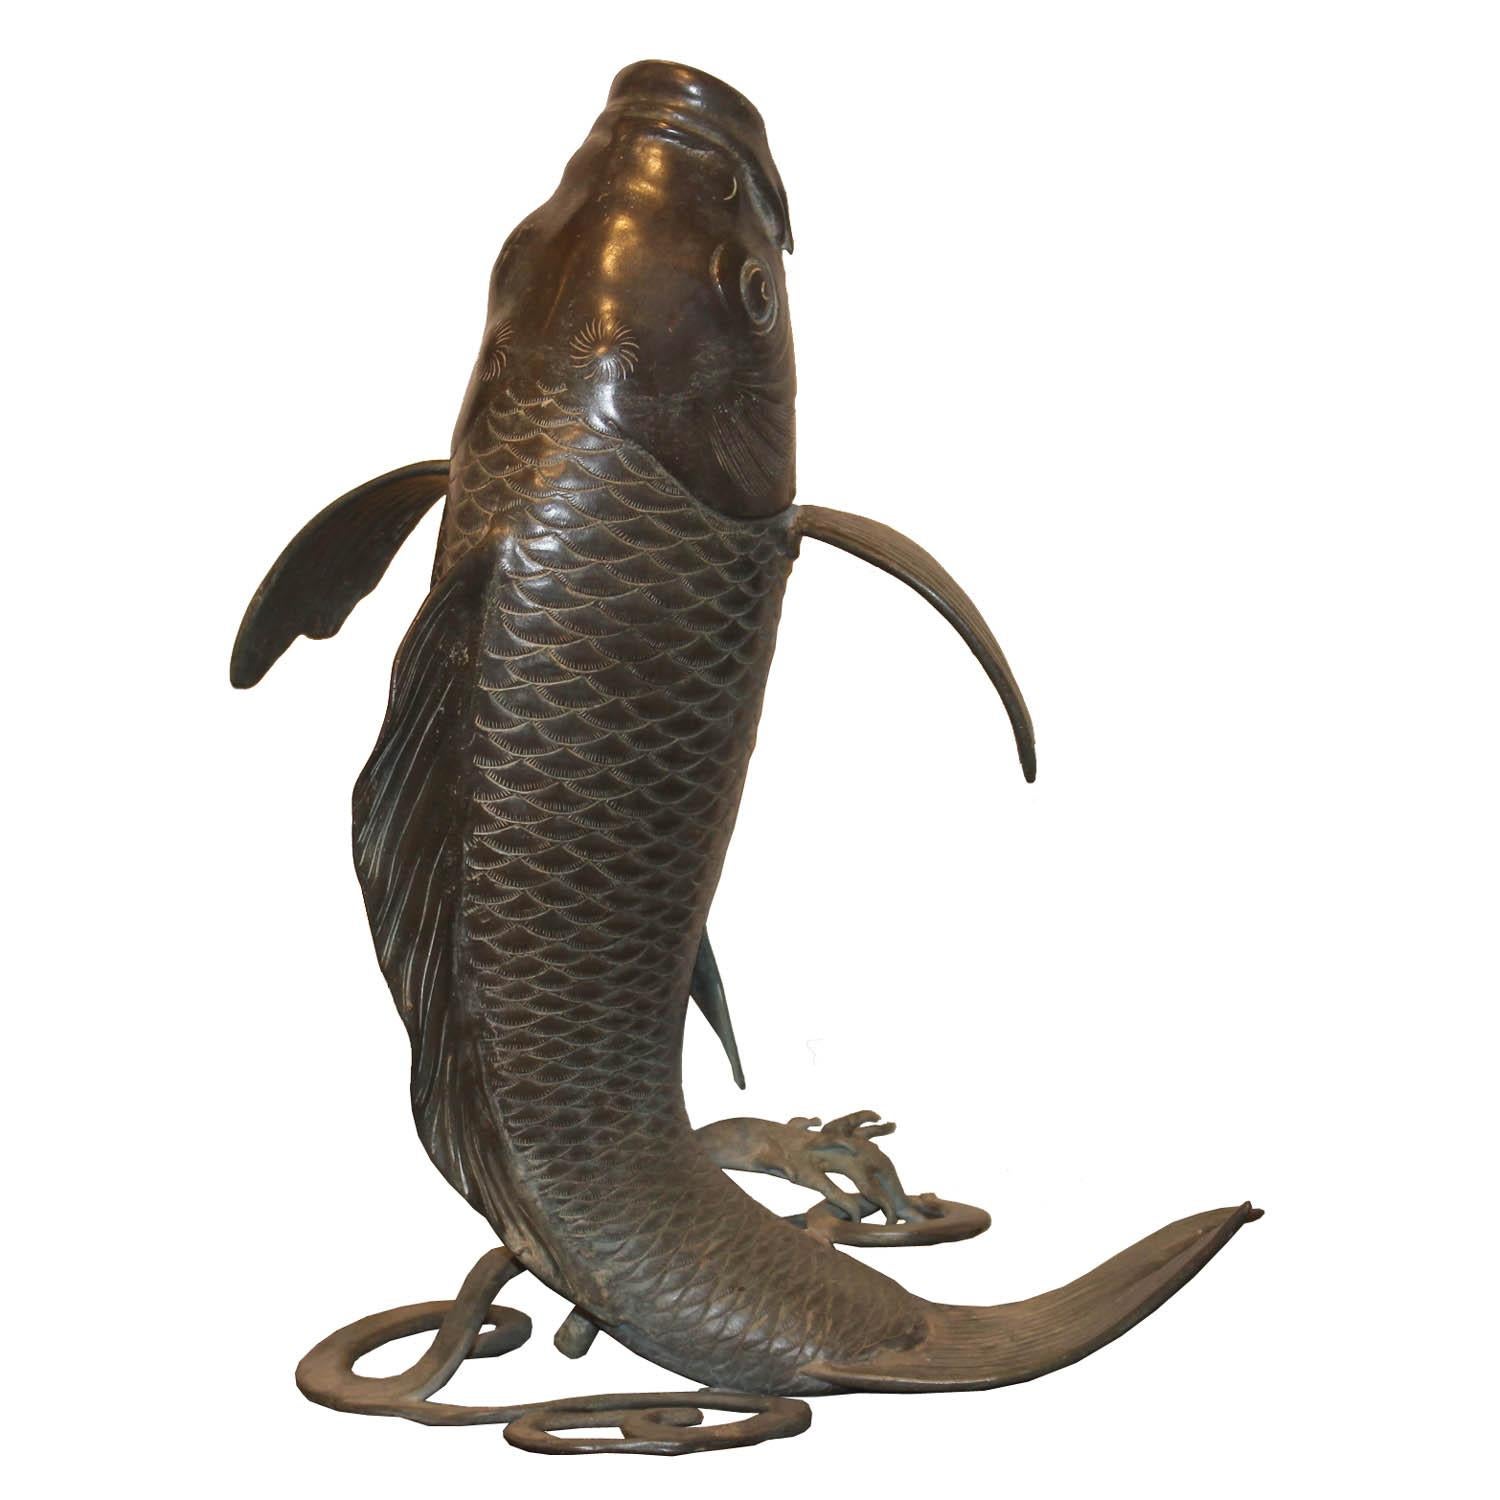 Handmade bronze fish. Originally a fountain with a small opening in the mouth for water to spout from and a small bronze tube at the bottom for water entry. Use as a small fountain or display on a coffee table or on a book shelf.